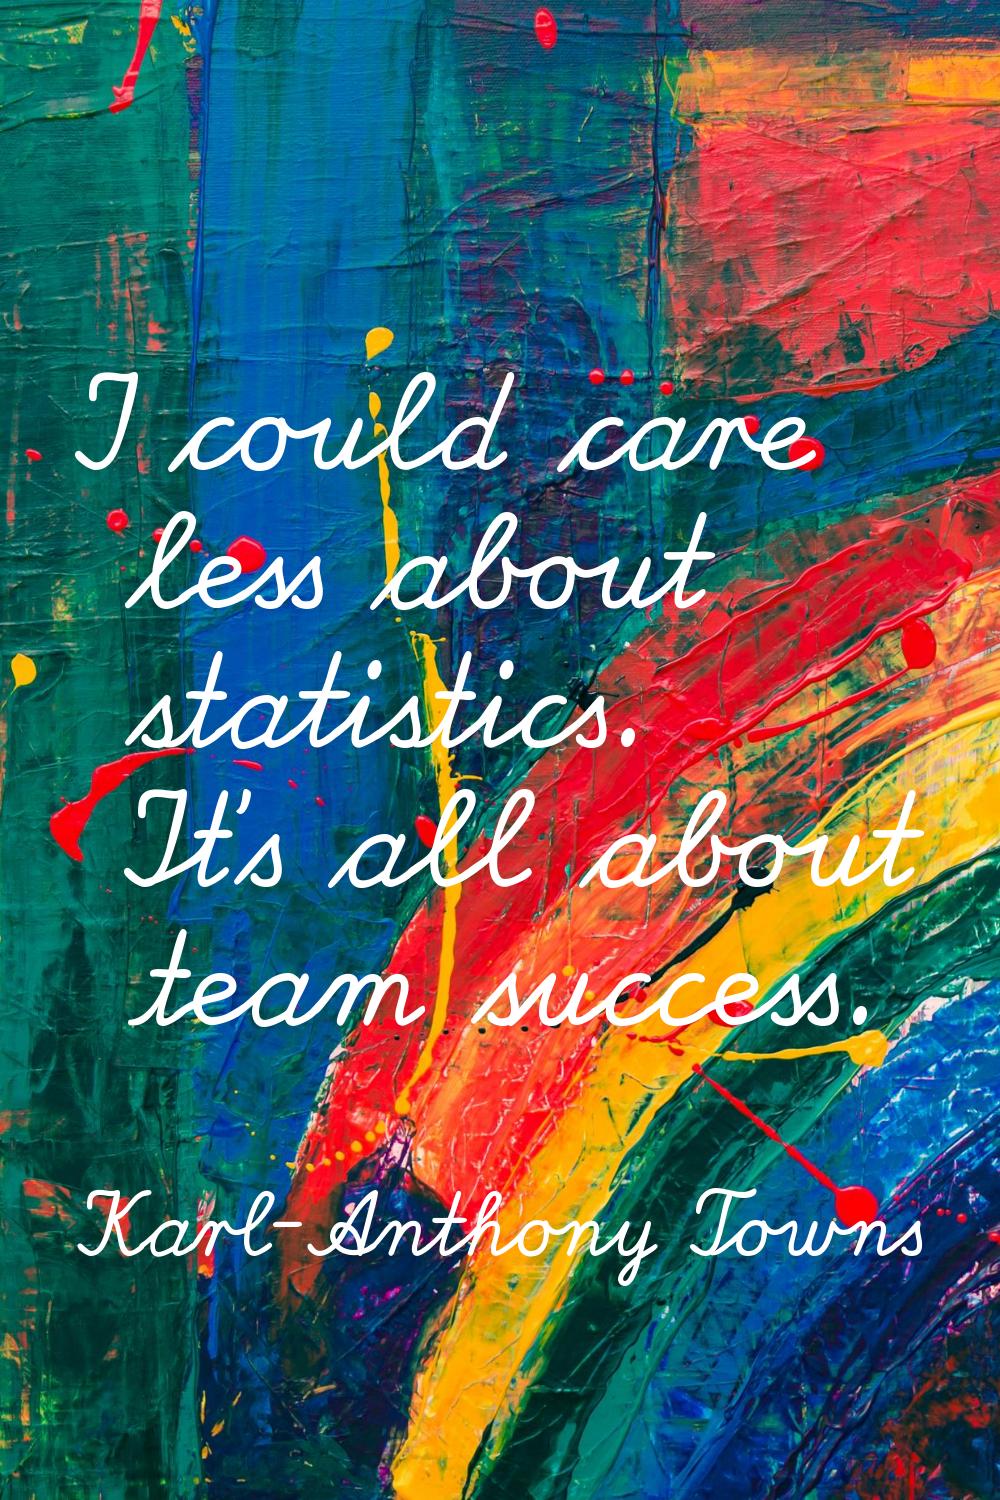 I could care less about statistics. It's all about team success.